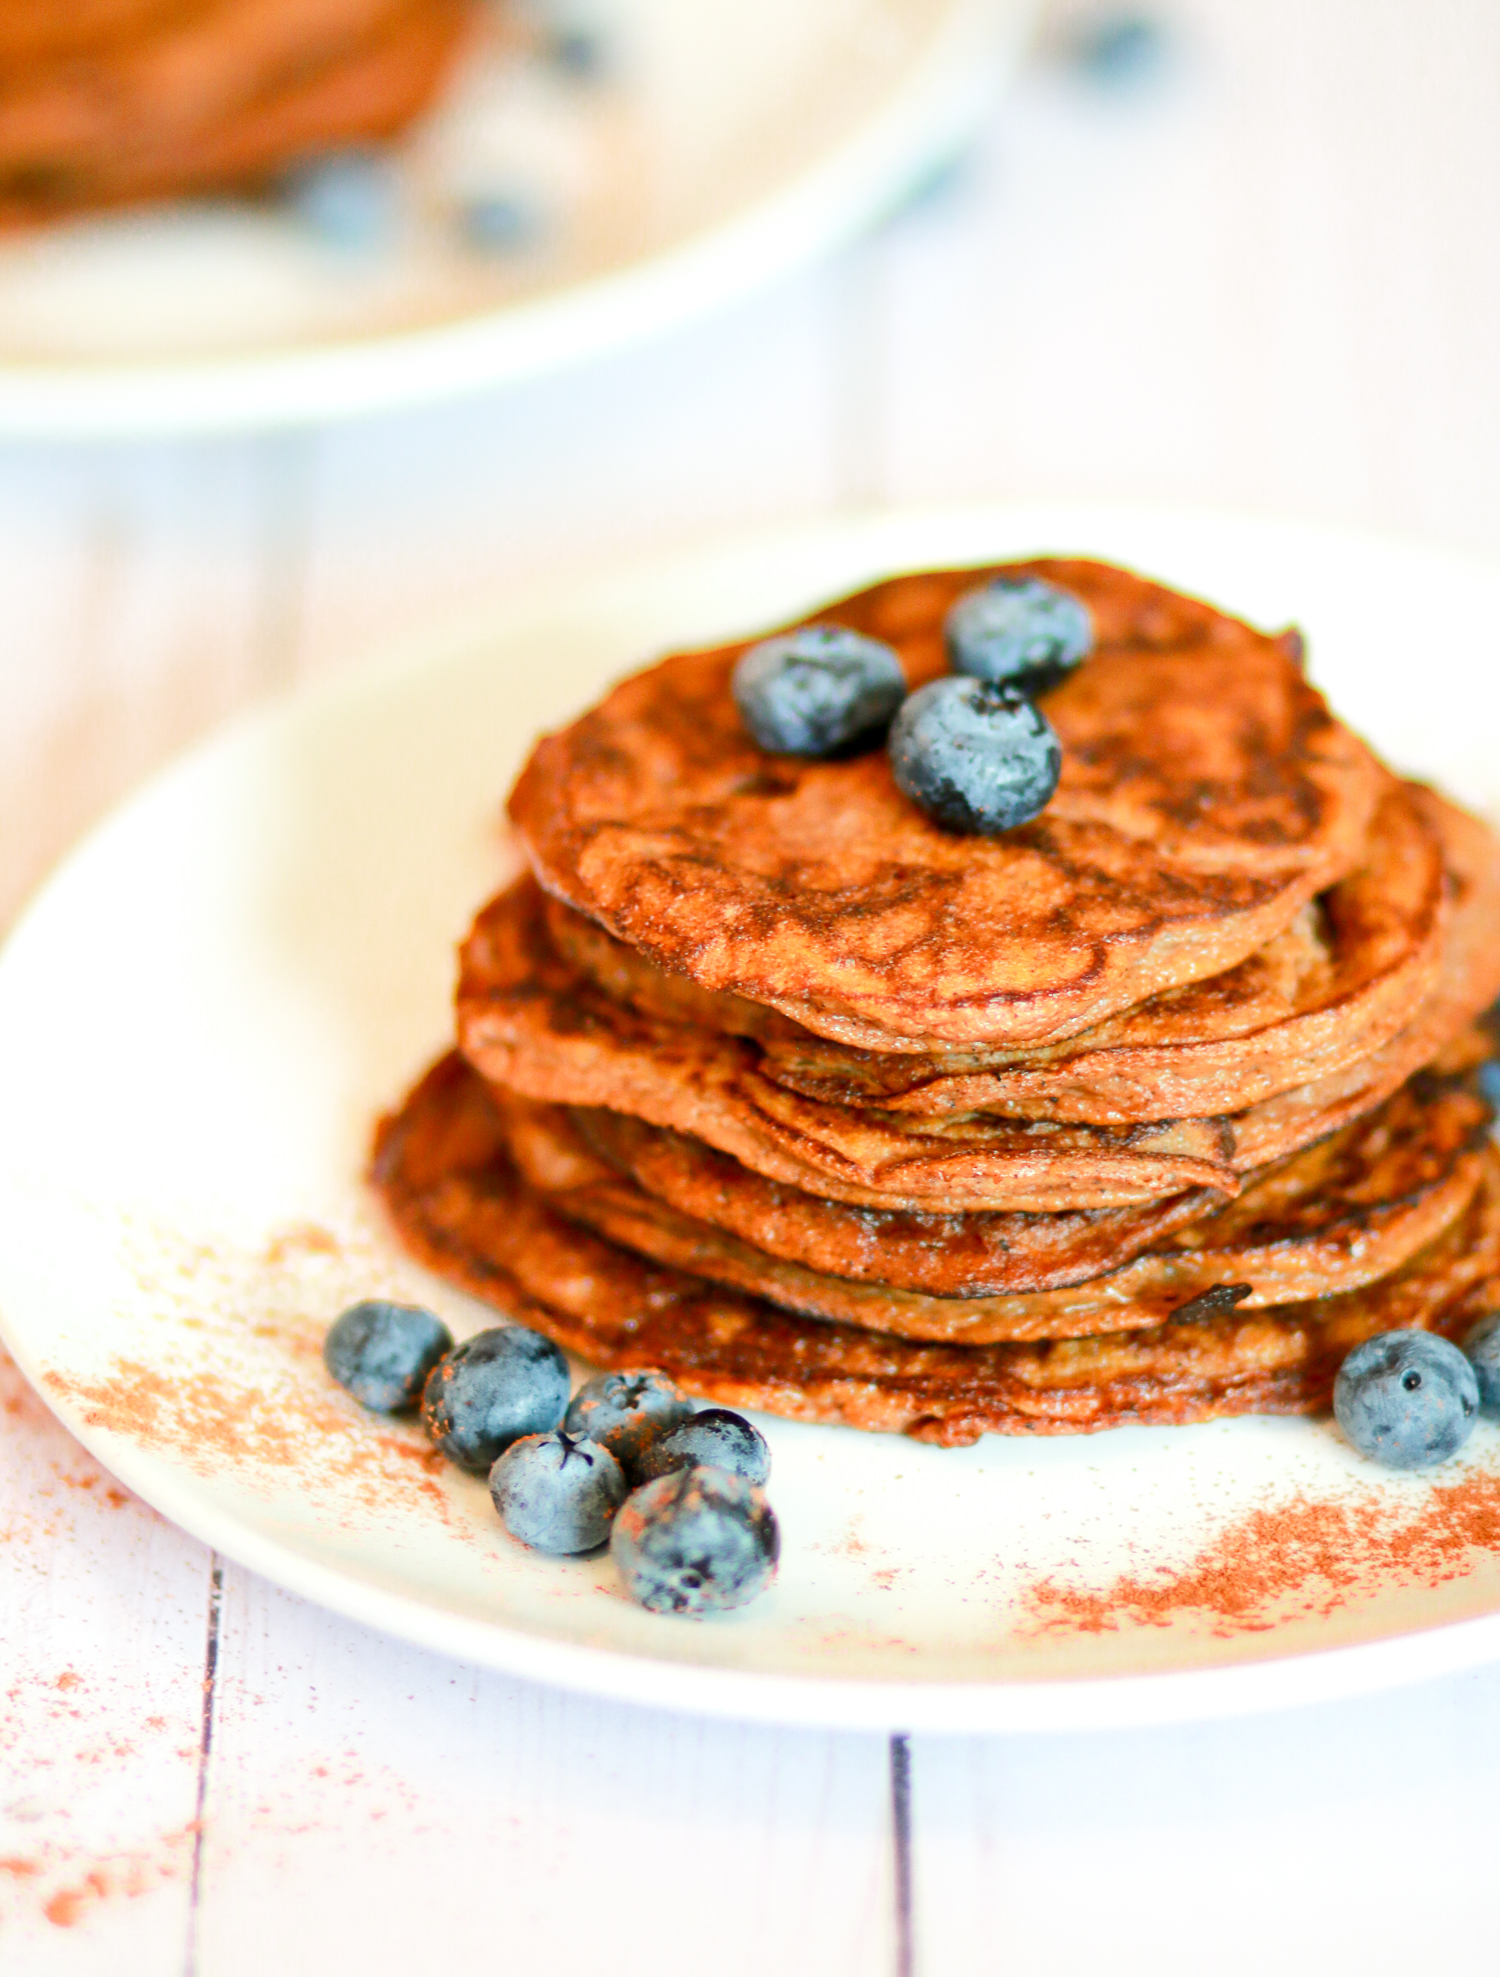 These delicious paleo pumpkin pancakes are low calorie and PERFECT for fall | Paleo Pumpkin Pancake recipe by southern blogger Stephanie Ziajka from Diary of a Debutante